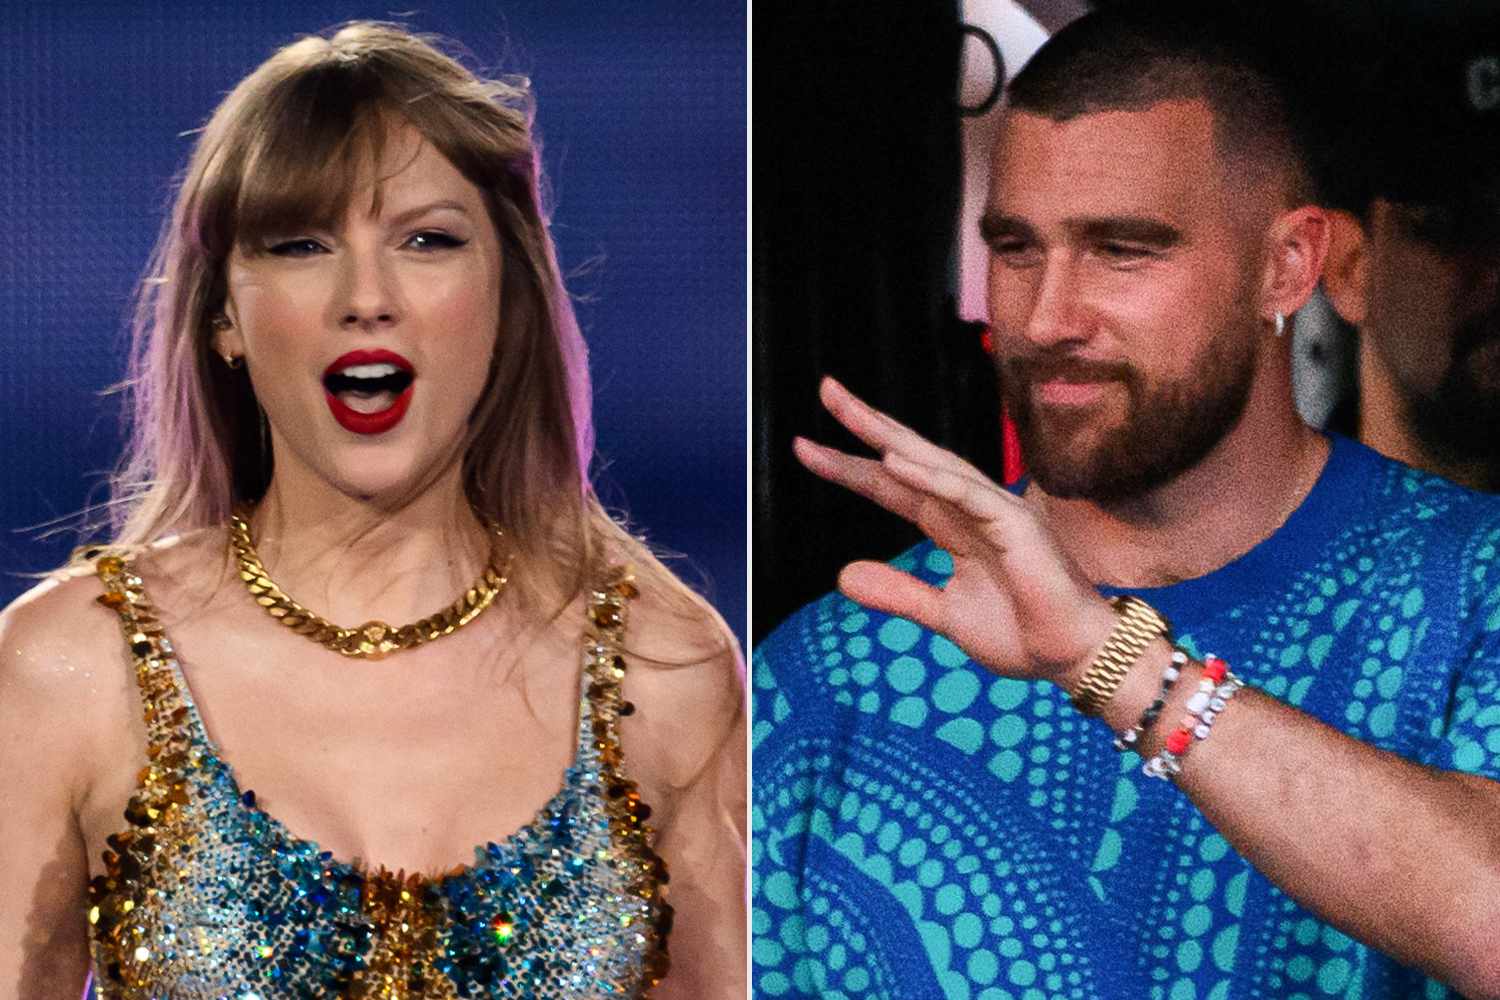 Taylor Swift's Unlikely Influence on the NFL's Financial Windfall